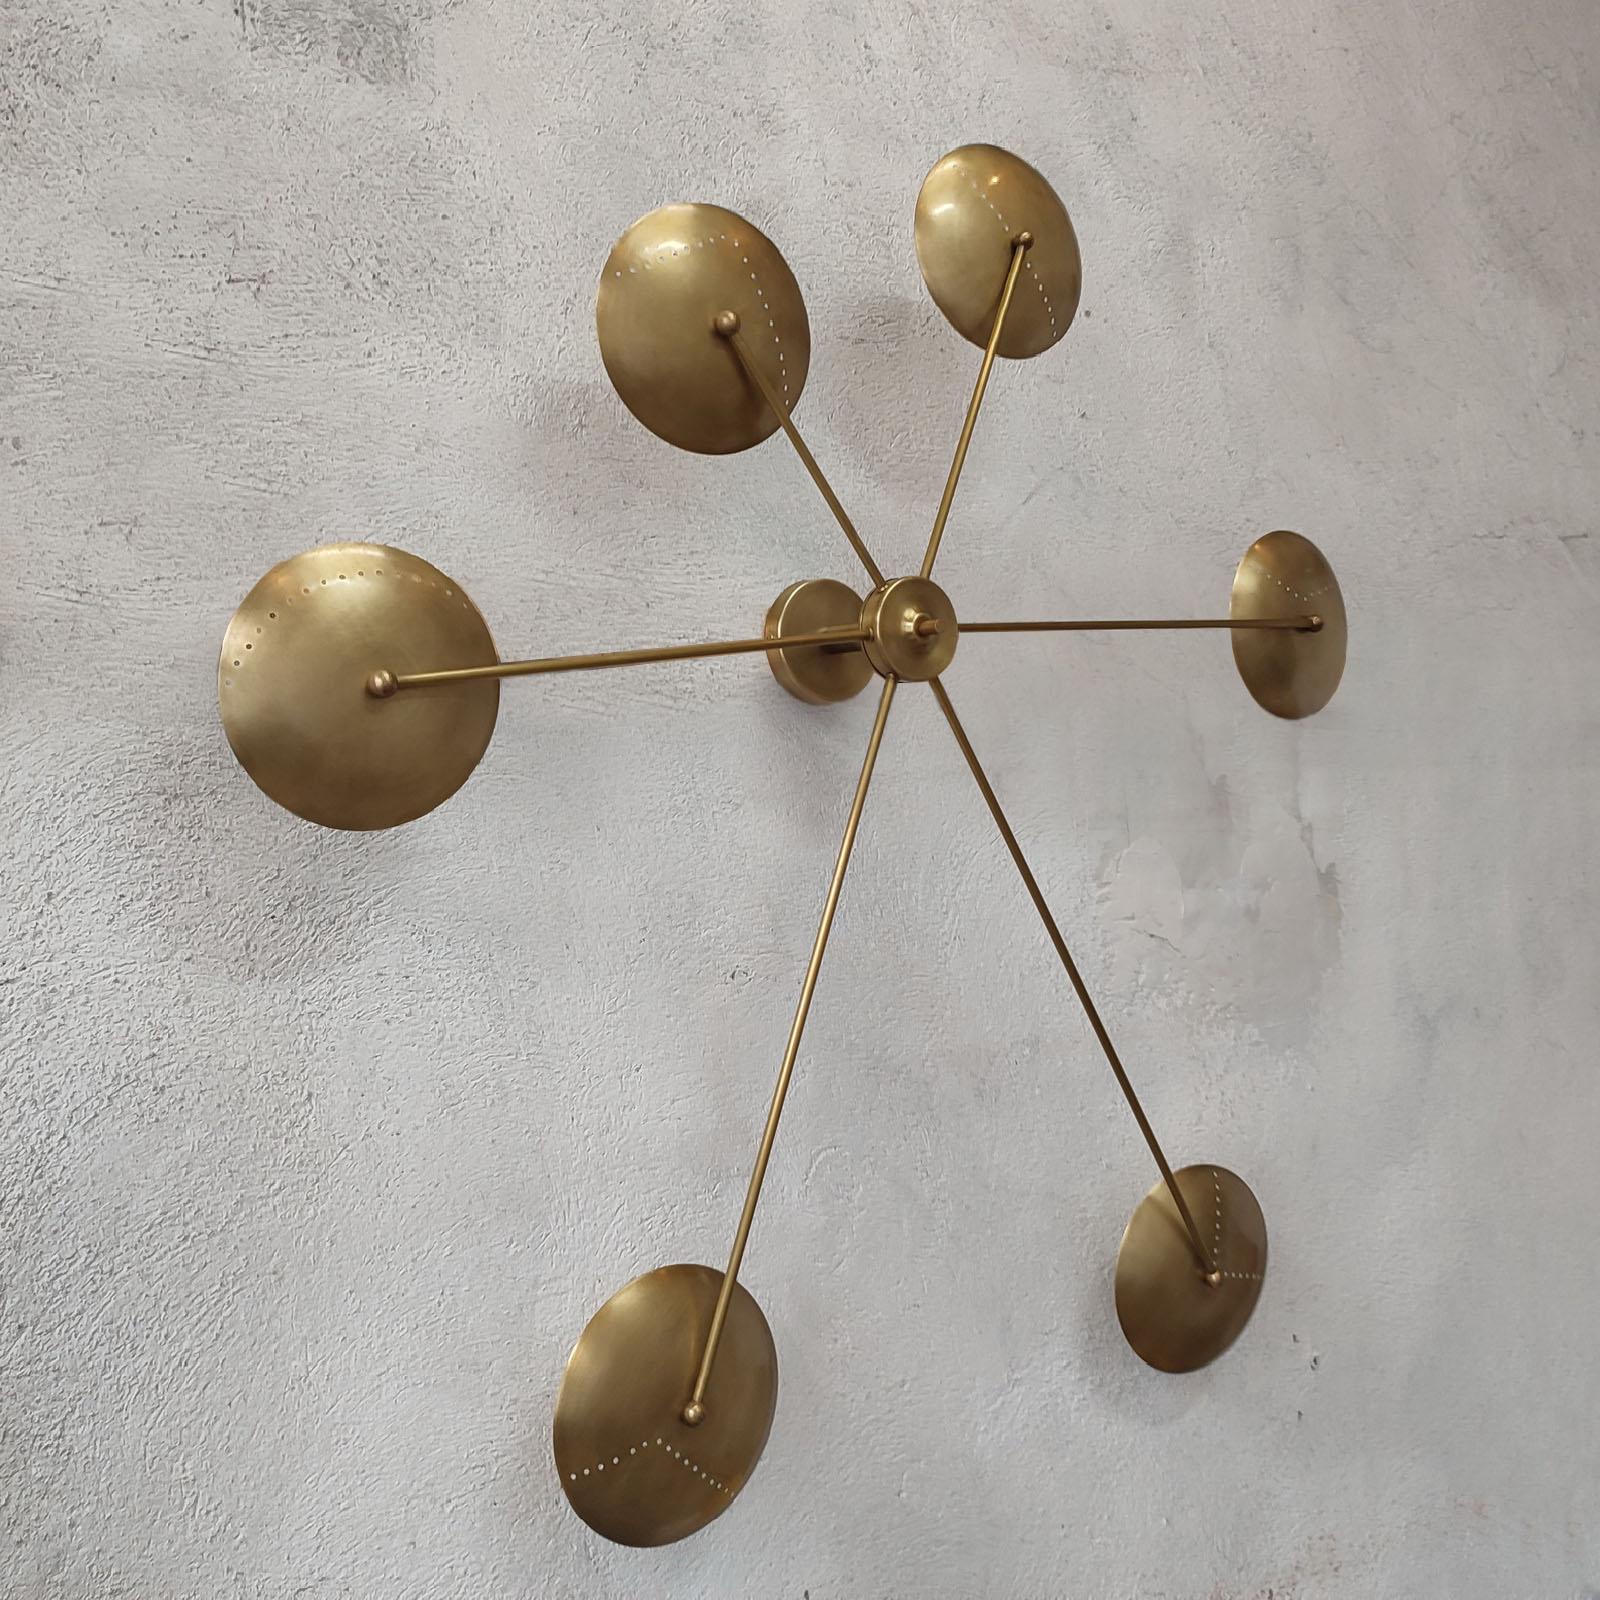 Mid-Century Modern Italian Spider Wall Light or Flush Mount, Patinated Brass, Mid-Century Style For Sale